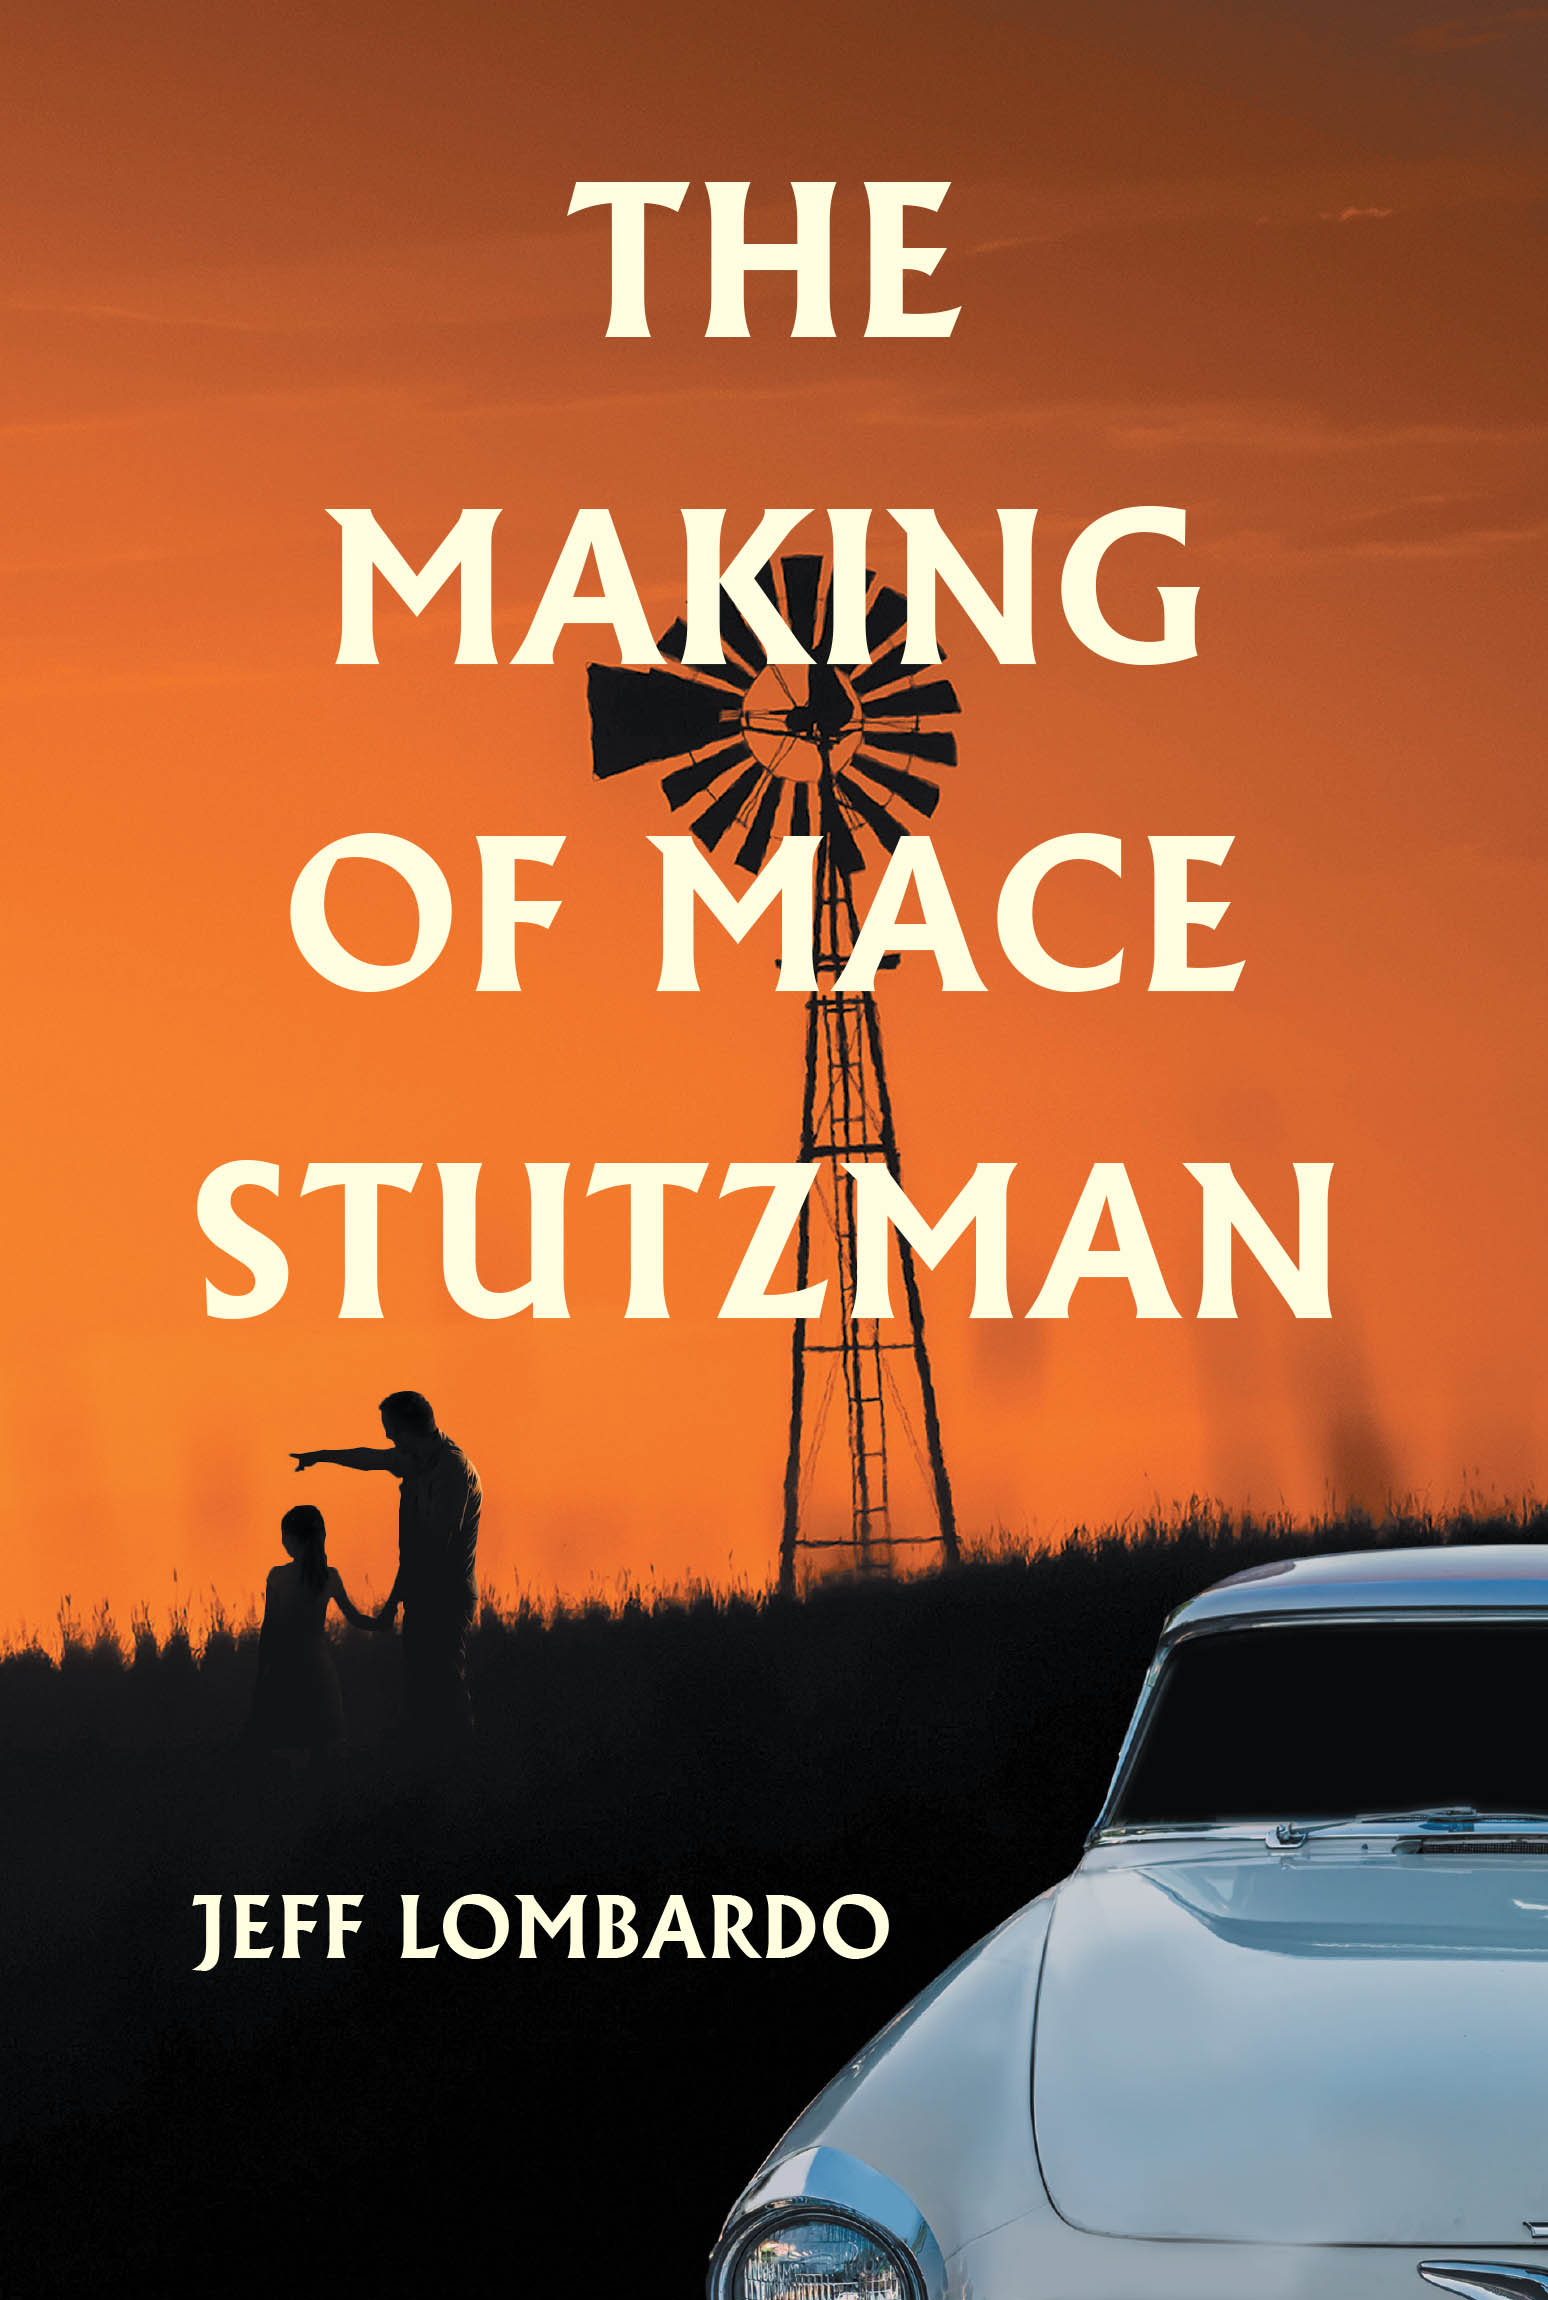 Author Jeff Lombardo’s New Book, "The Making of Mace Stutzman," Reveals How One Boy's Generational Trauma and Abuse from Childhood Forever Shapes His Future